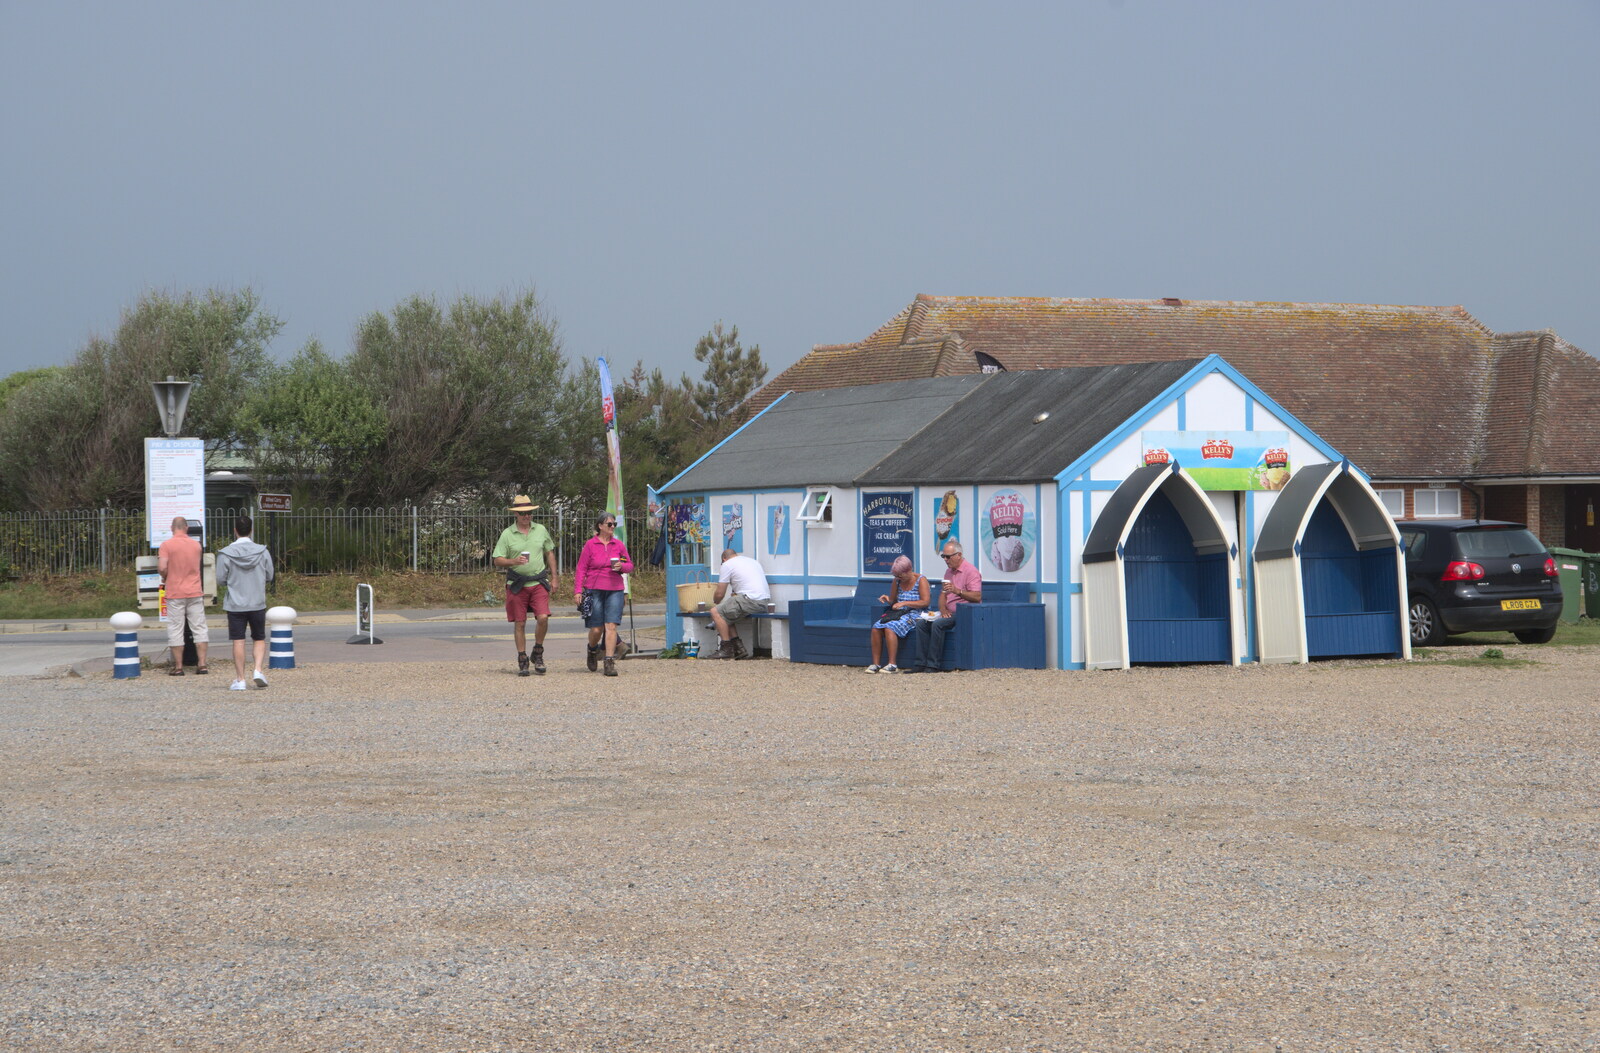 The ice-cream hut by the Harbour car park from A Return to Southwold, Suffolk - 14th June 2020